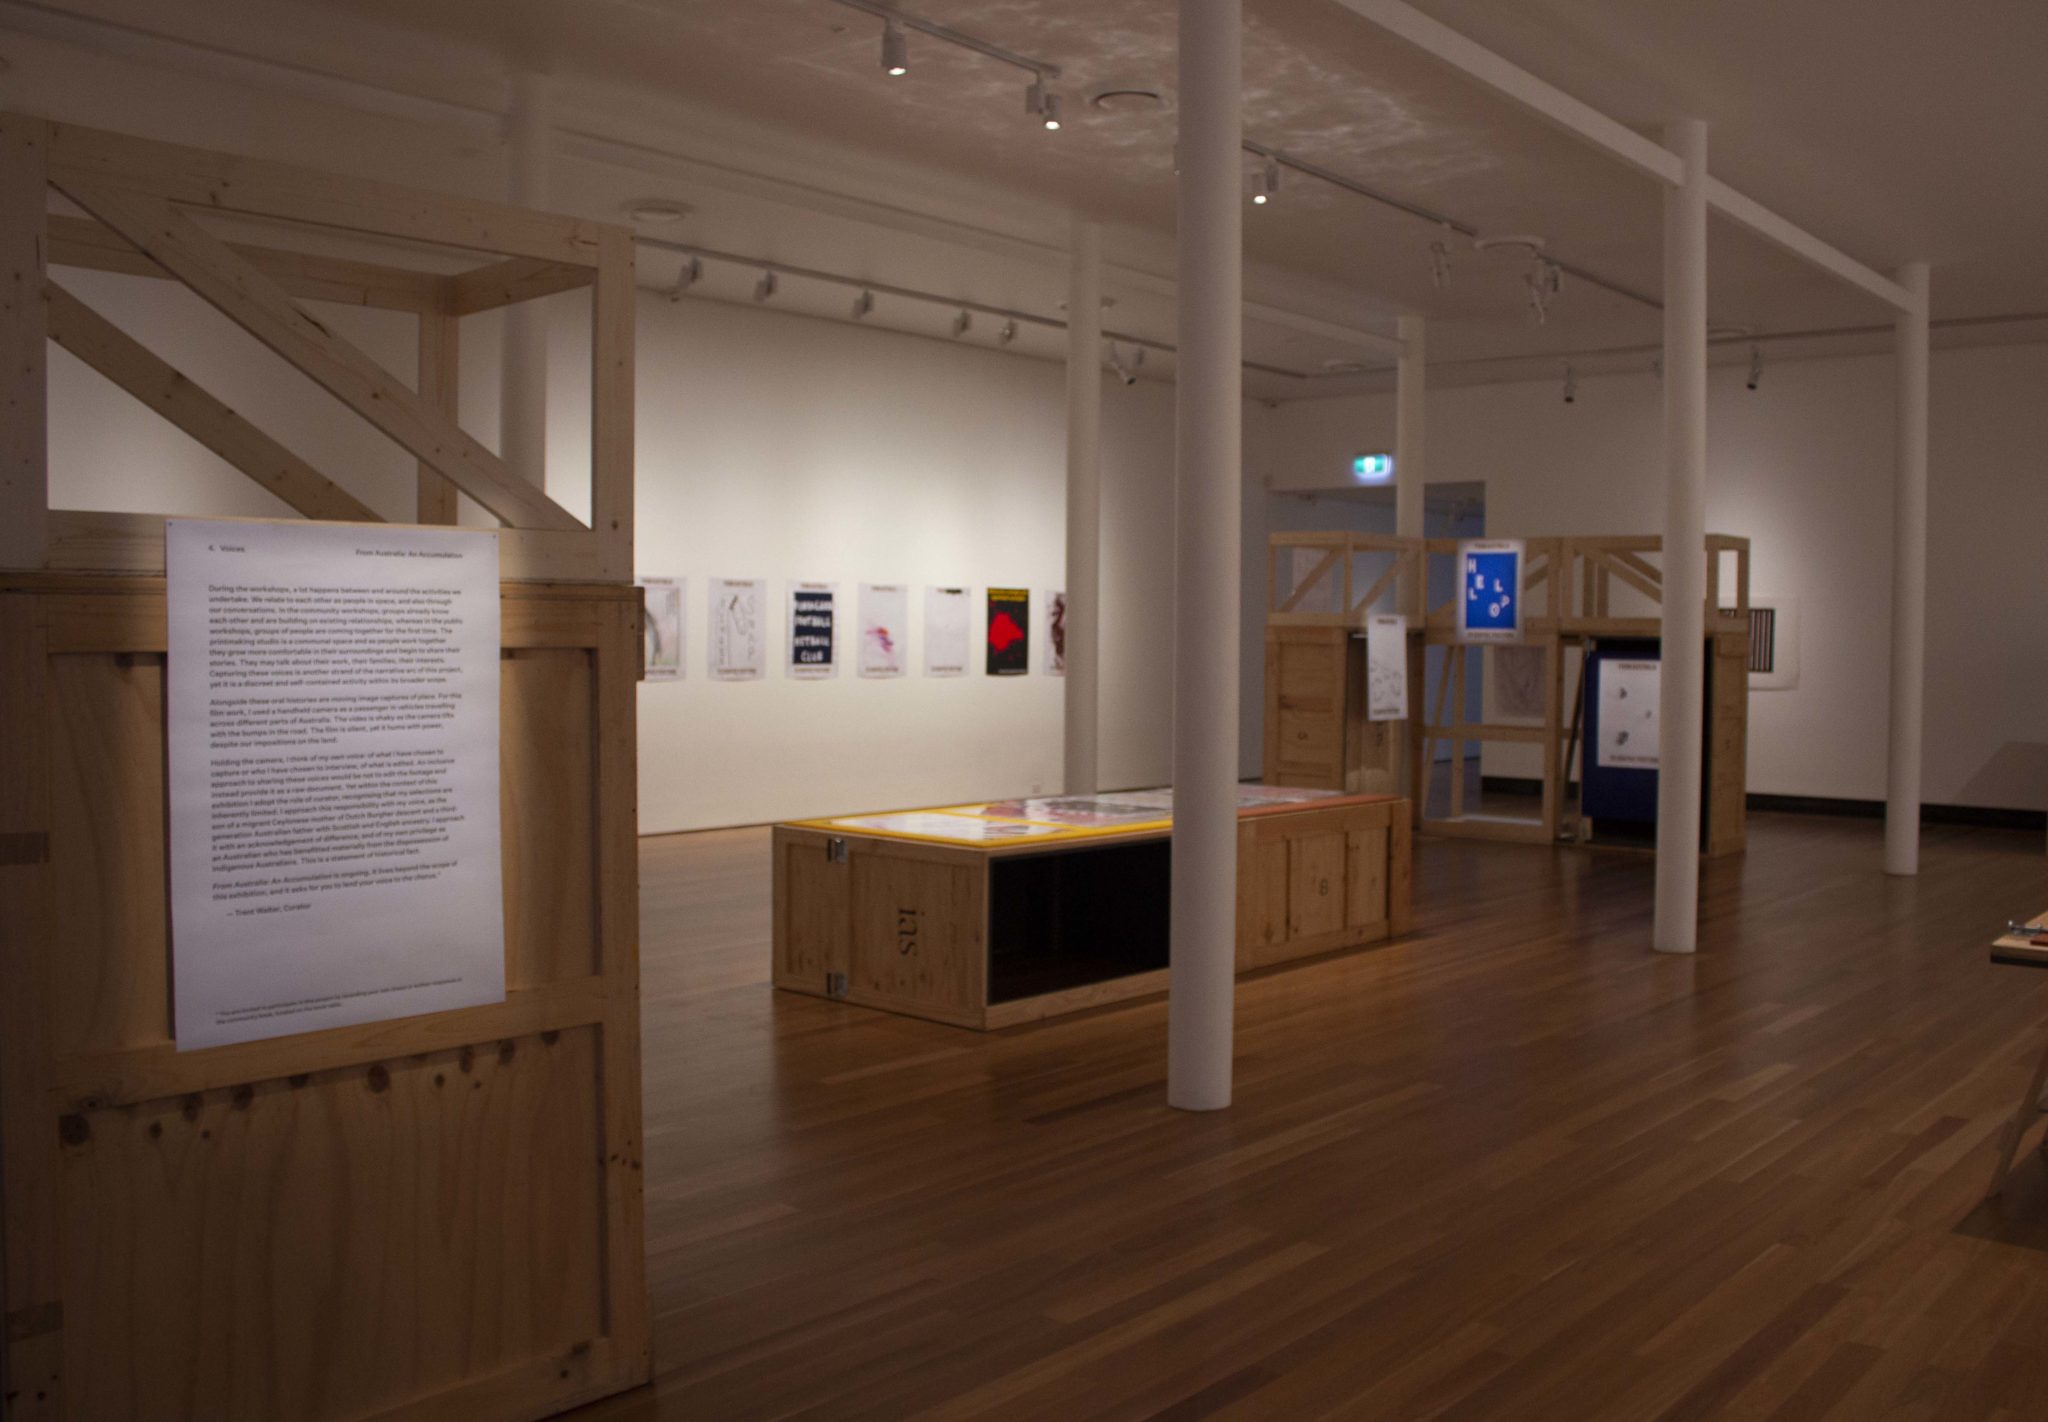 Exhibition documentation of From Australia: An Accumulation, A Negative Press exhibition, touring with NETS Victoria. Curated by Trent Walter. Shown in Gallery 4, Latrobe Regional Gallery, 2021.